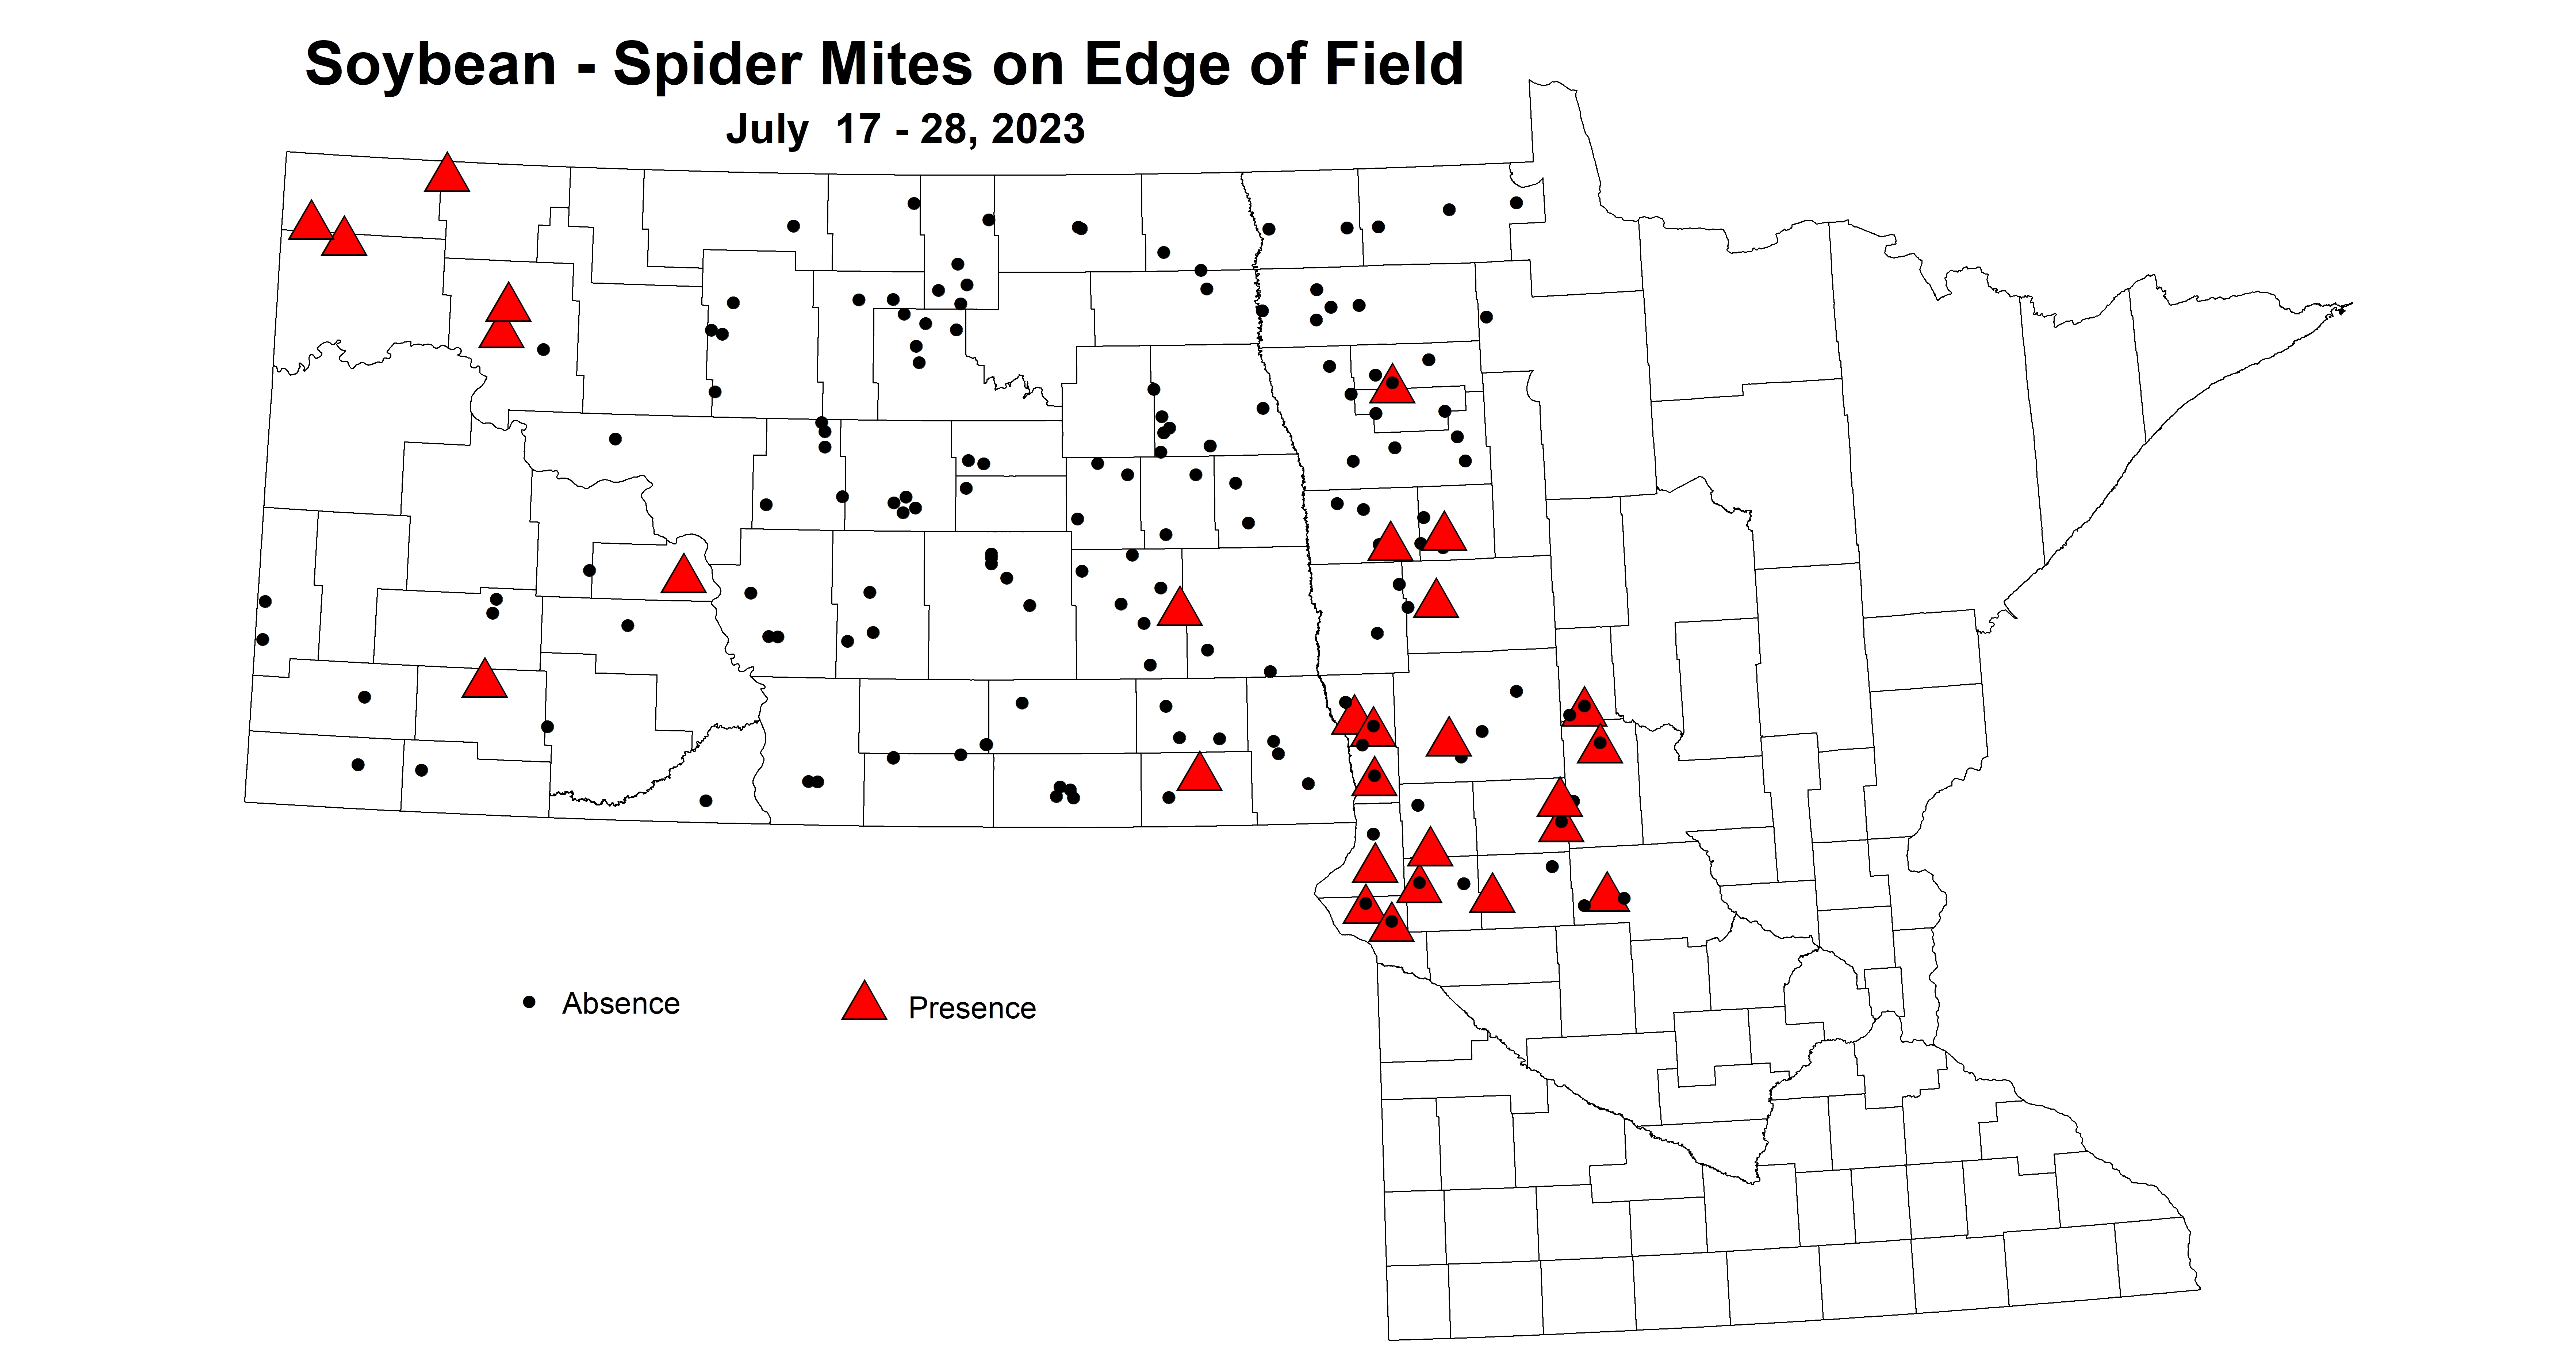 soybean spider mites on edge of field July 17-28 2023